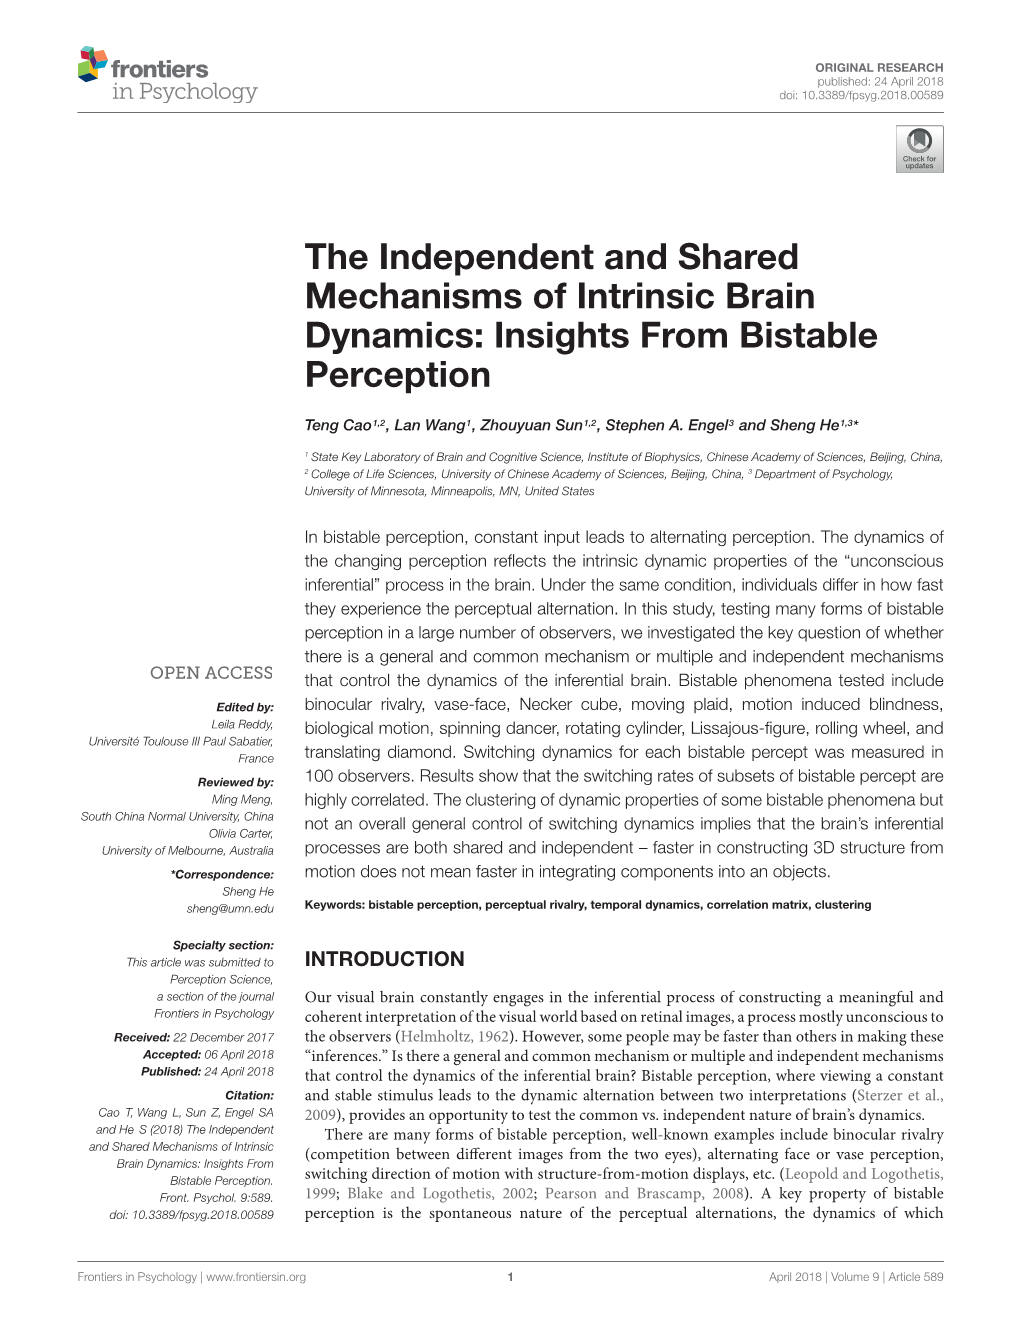 Insights from Bistable Perception